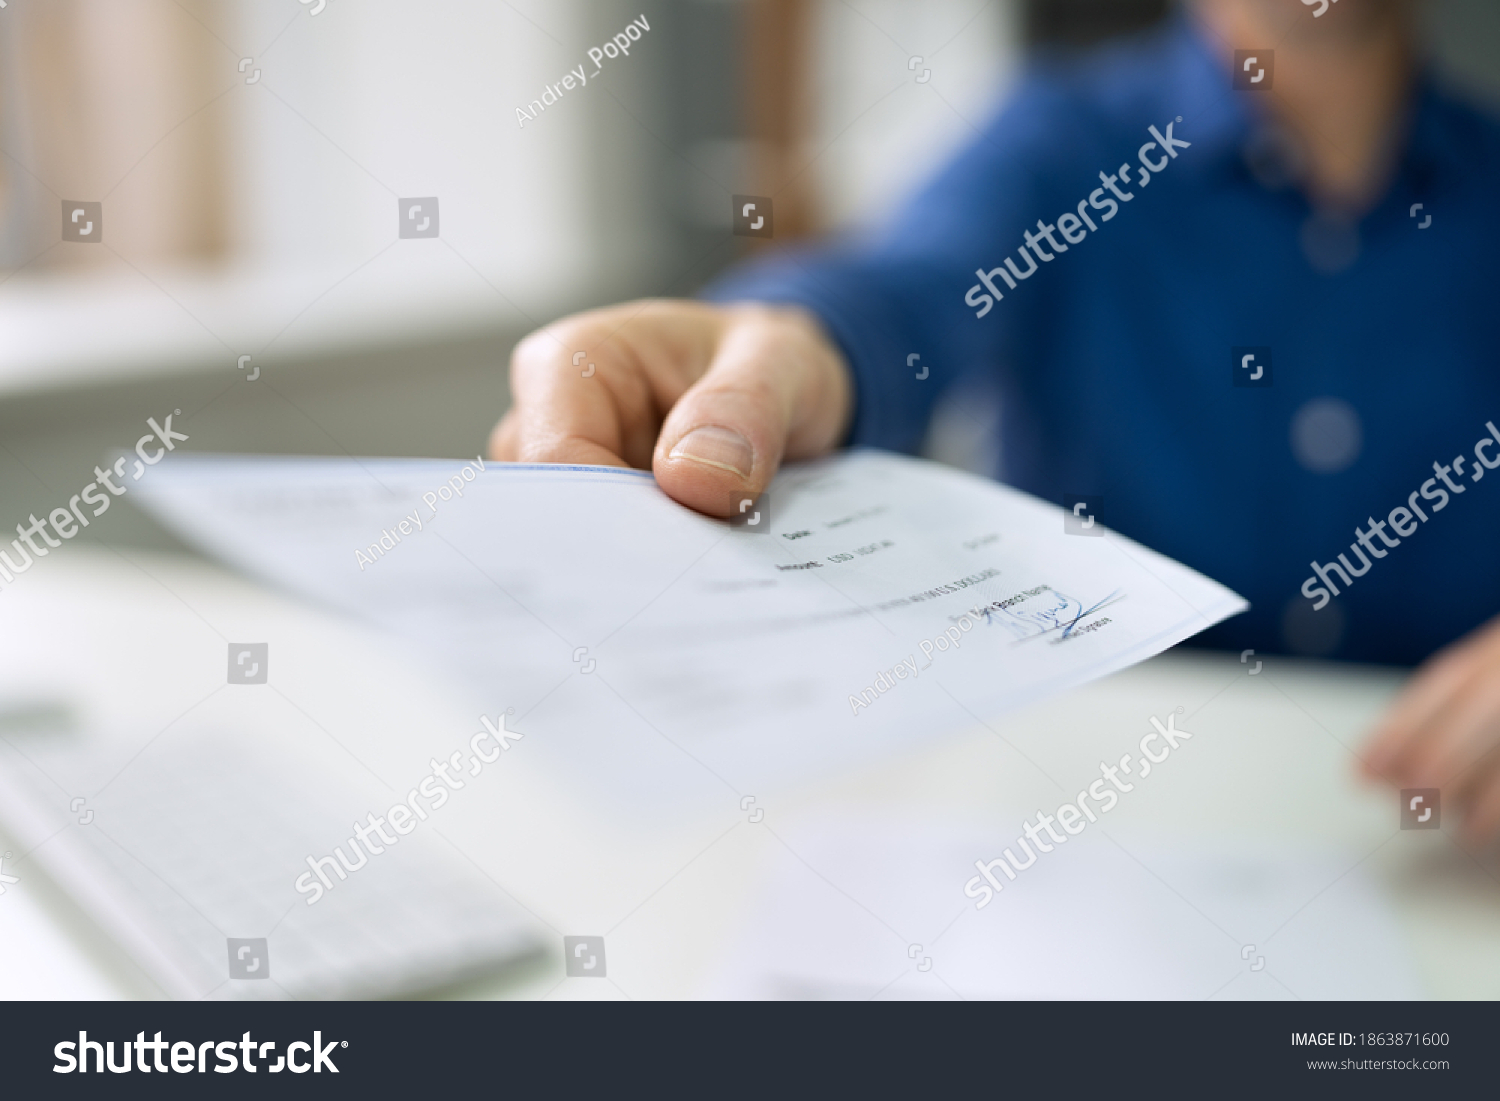 Handing Employee Payroll Cheque Security Check Stock Photo 1863871600 | Shutterstock